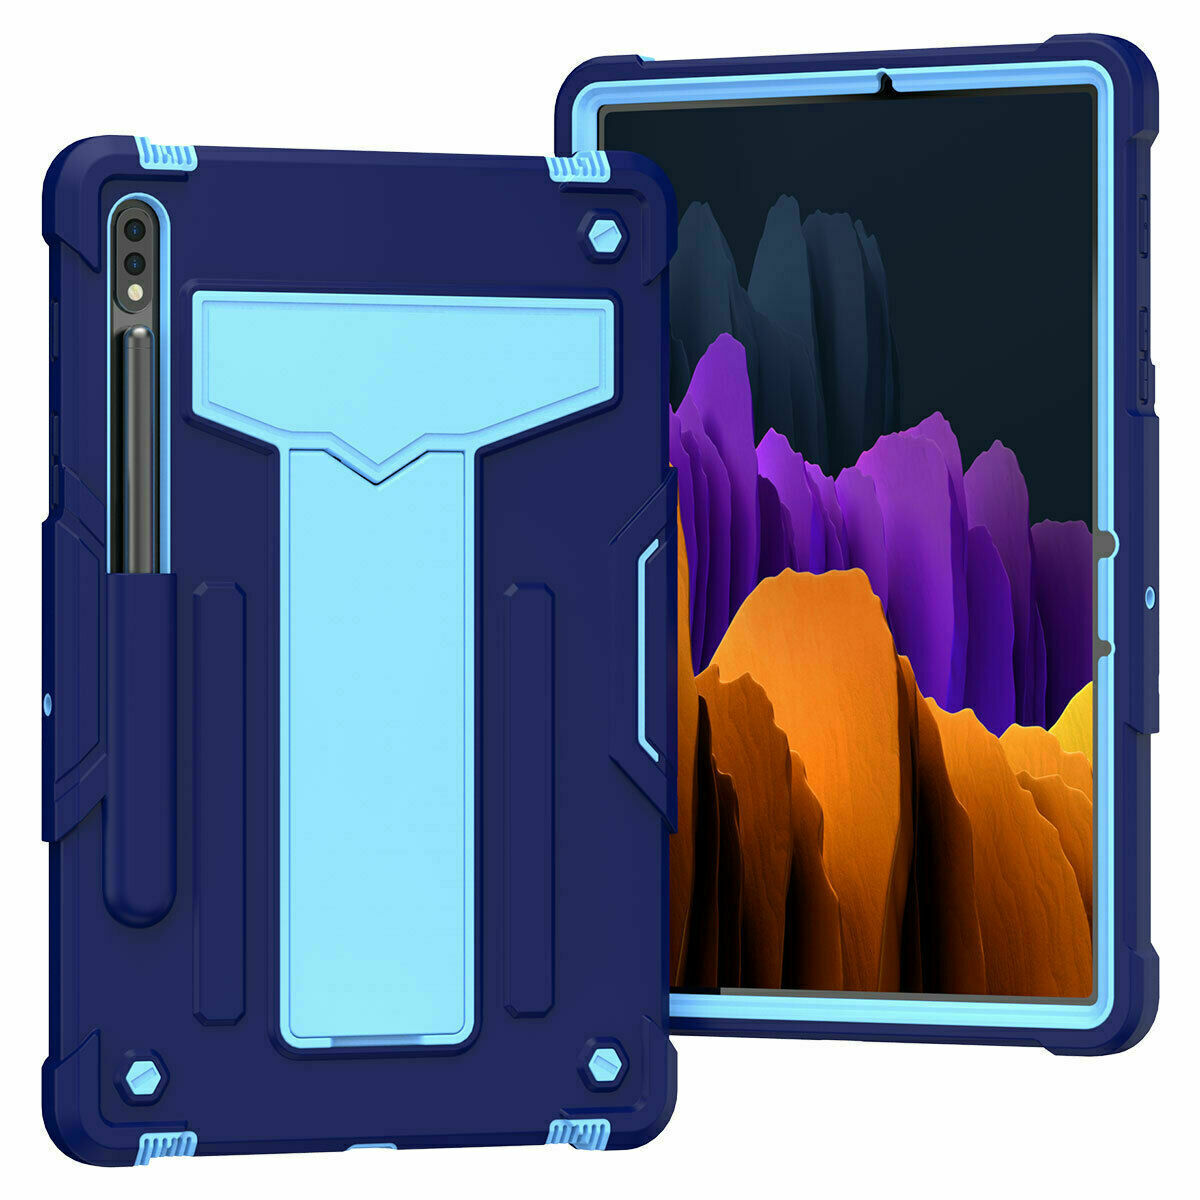 Epicgadget Case for Samsung Galaxy Tab S8+ 12.4 SM-X800/X806 (2022) - Dual Layer Protective Hybrid Cover Case With Kickstand For Galaxy Tab S8 Plus 12.4 Inch Released in 2022 (Navy Blue/Blue) - image 1 of 4